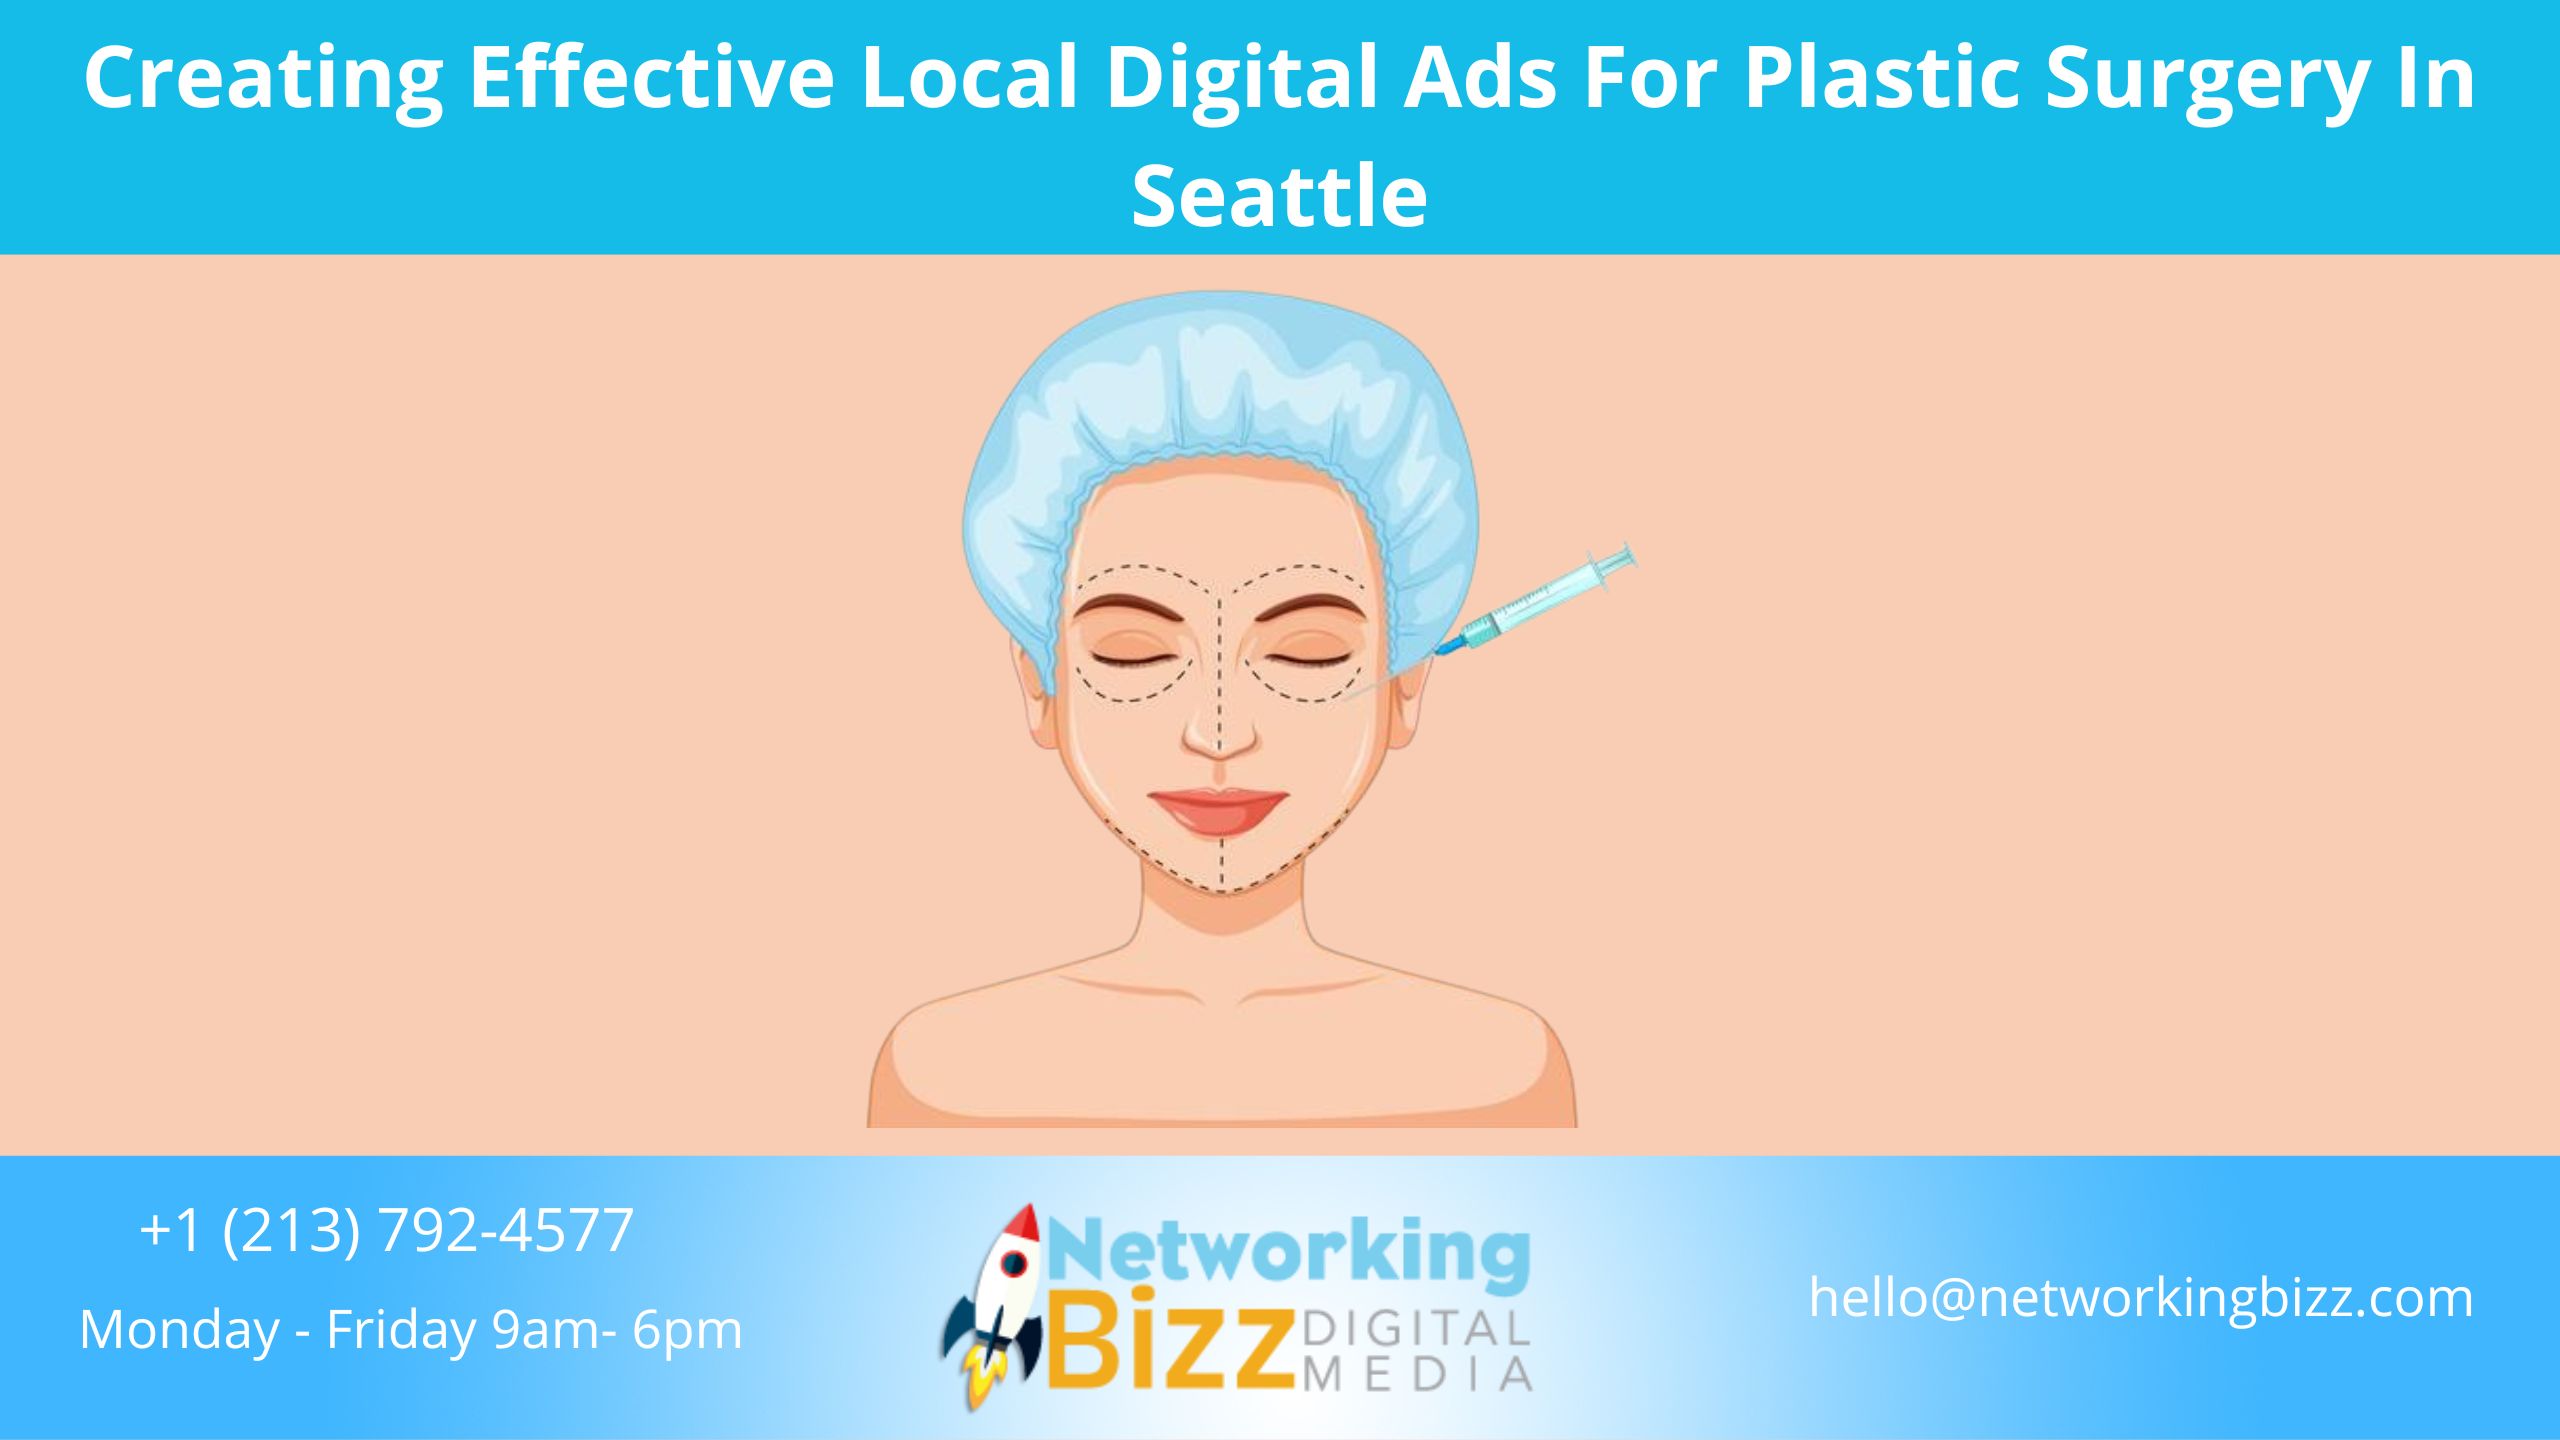 Creating Effective Local Digital Ads For Plastic Surgery In Seattle